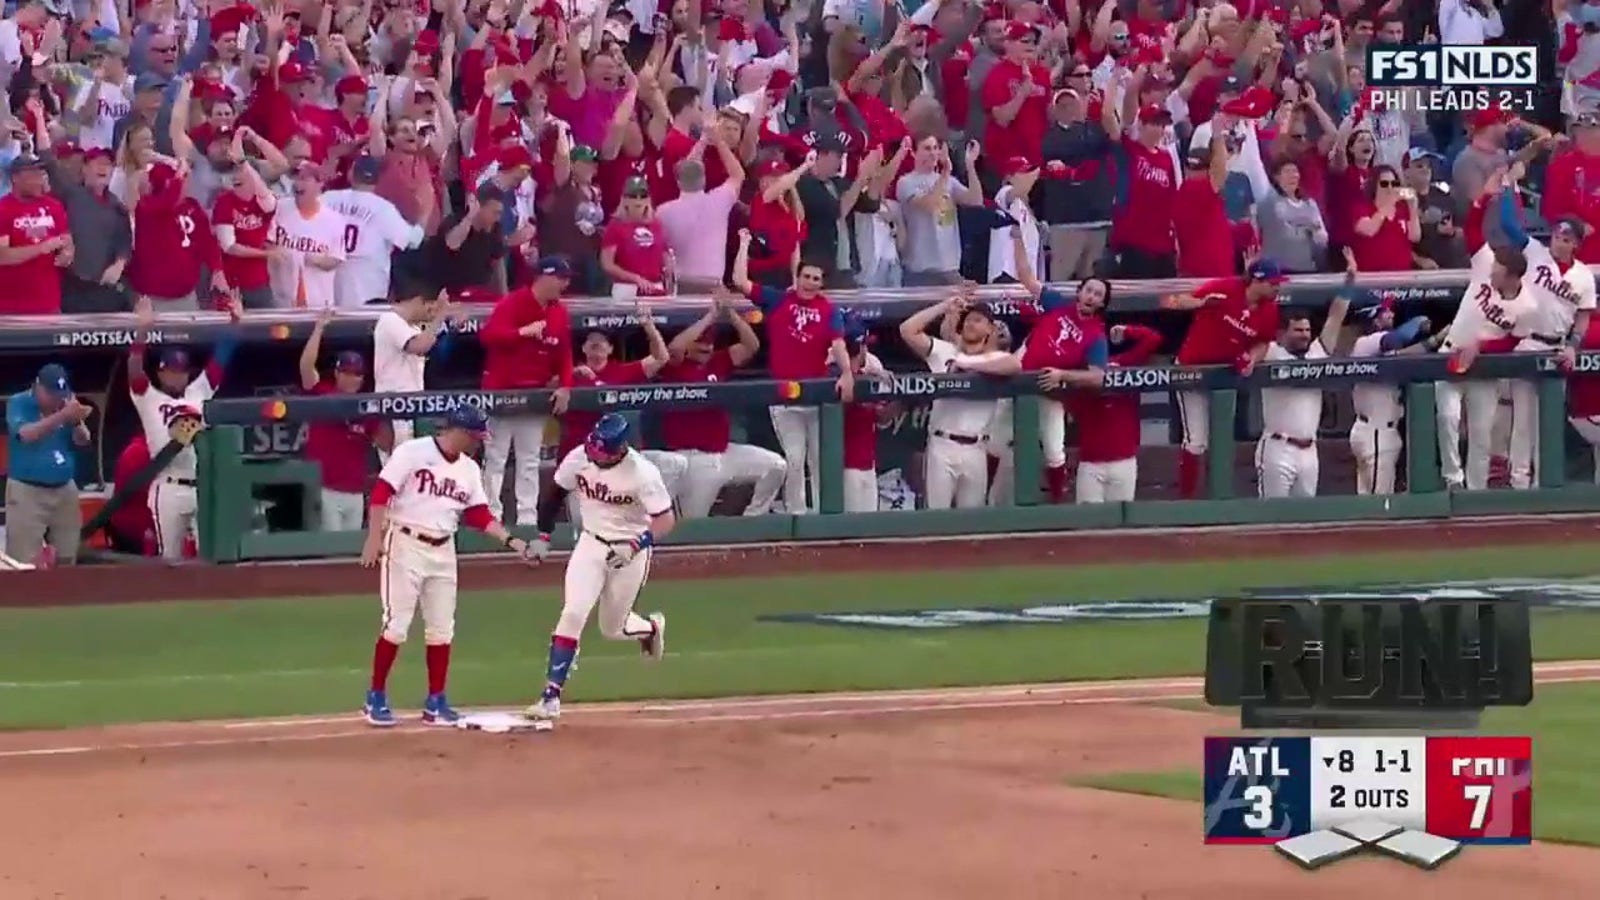 Bryce Harper crushes a solo home run to give the Phillies an 8-3